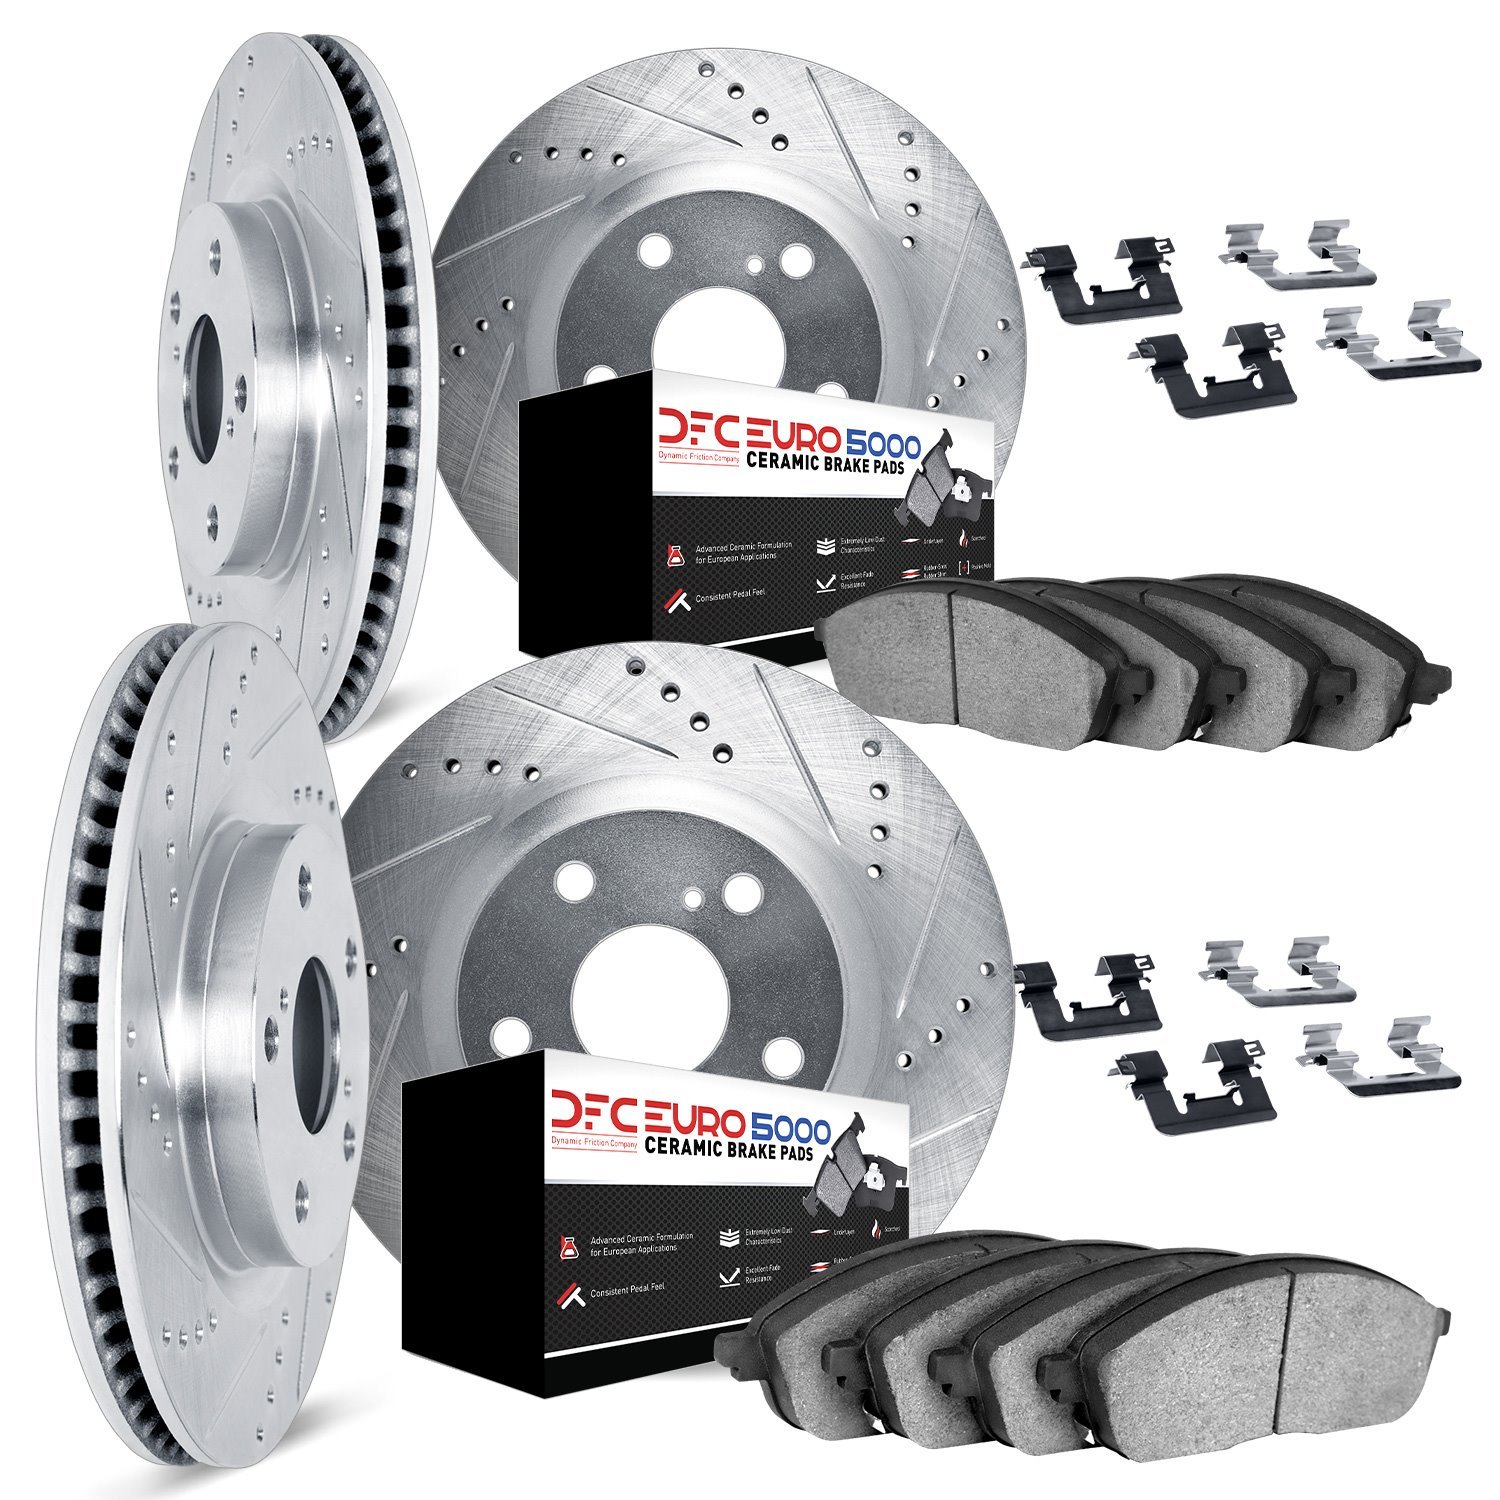 7614-31014 Drilled/Slotted Brake Rotors w/5000 Euro Ceramic Brake Pads Kit & Hardware [Silver], 1995-2001 BMW, Position: Front a